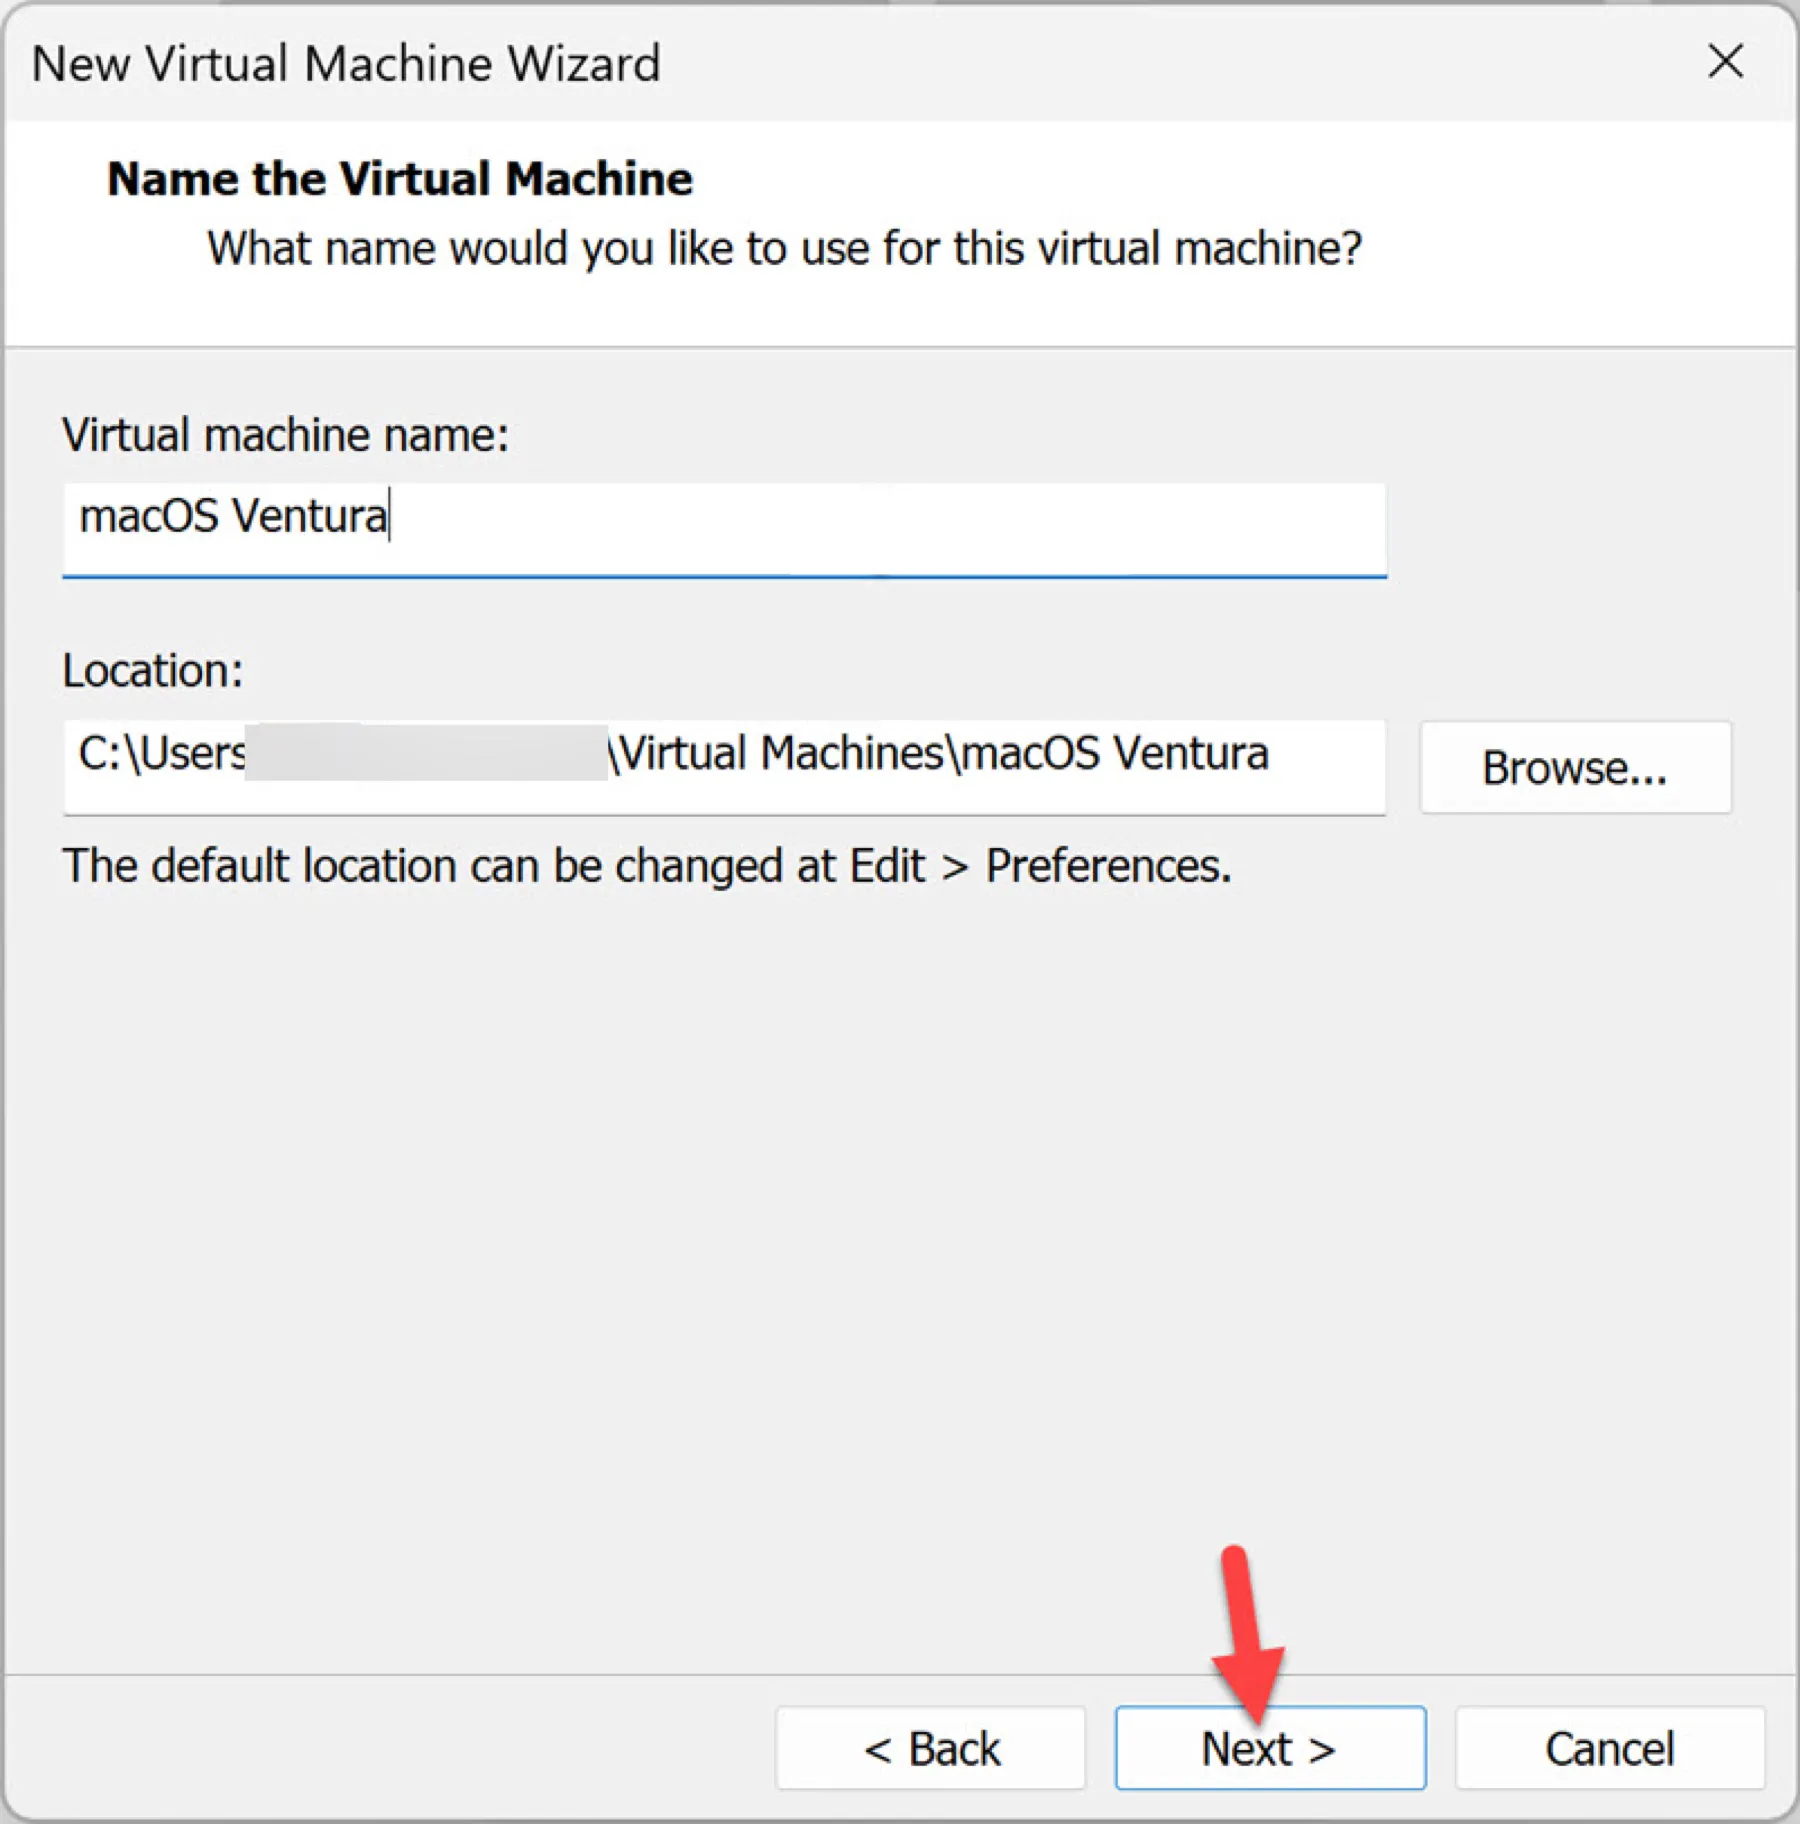 Name your virtual machine and save it to a location